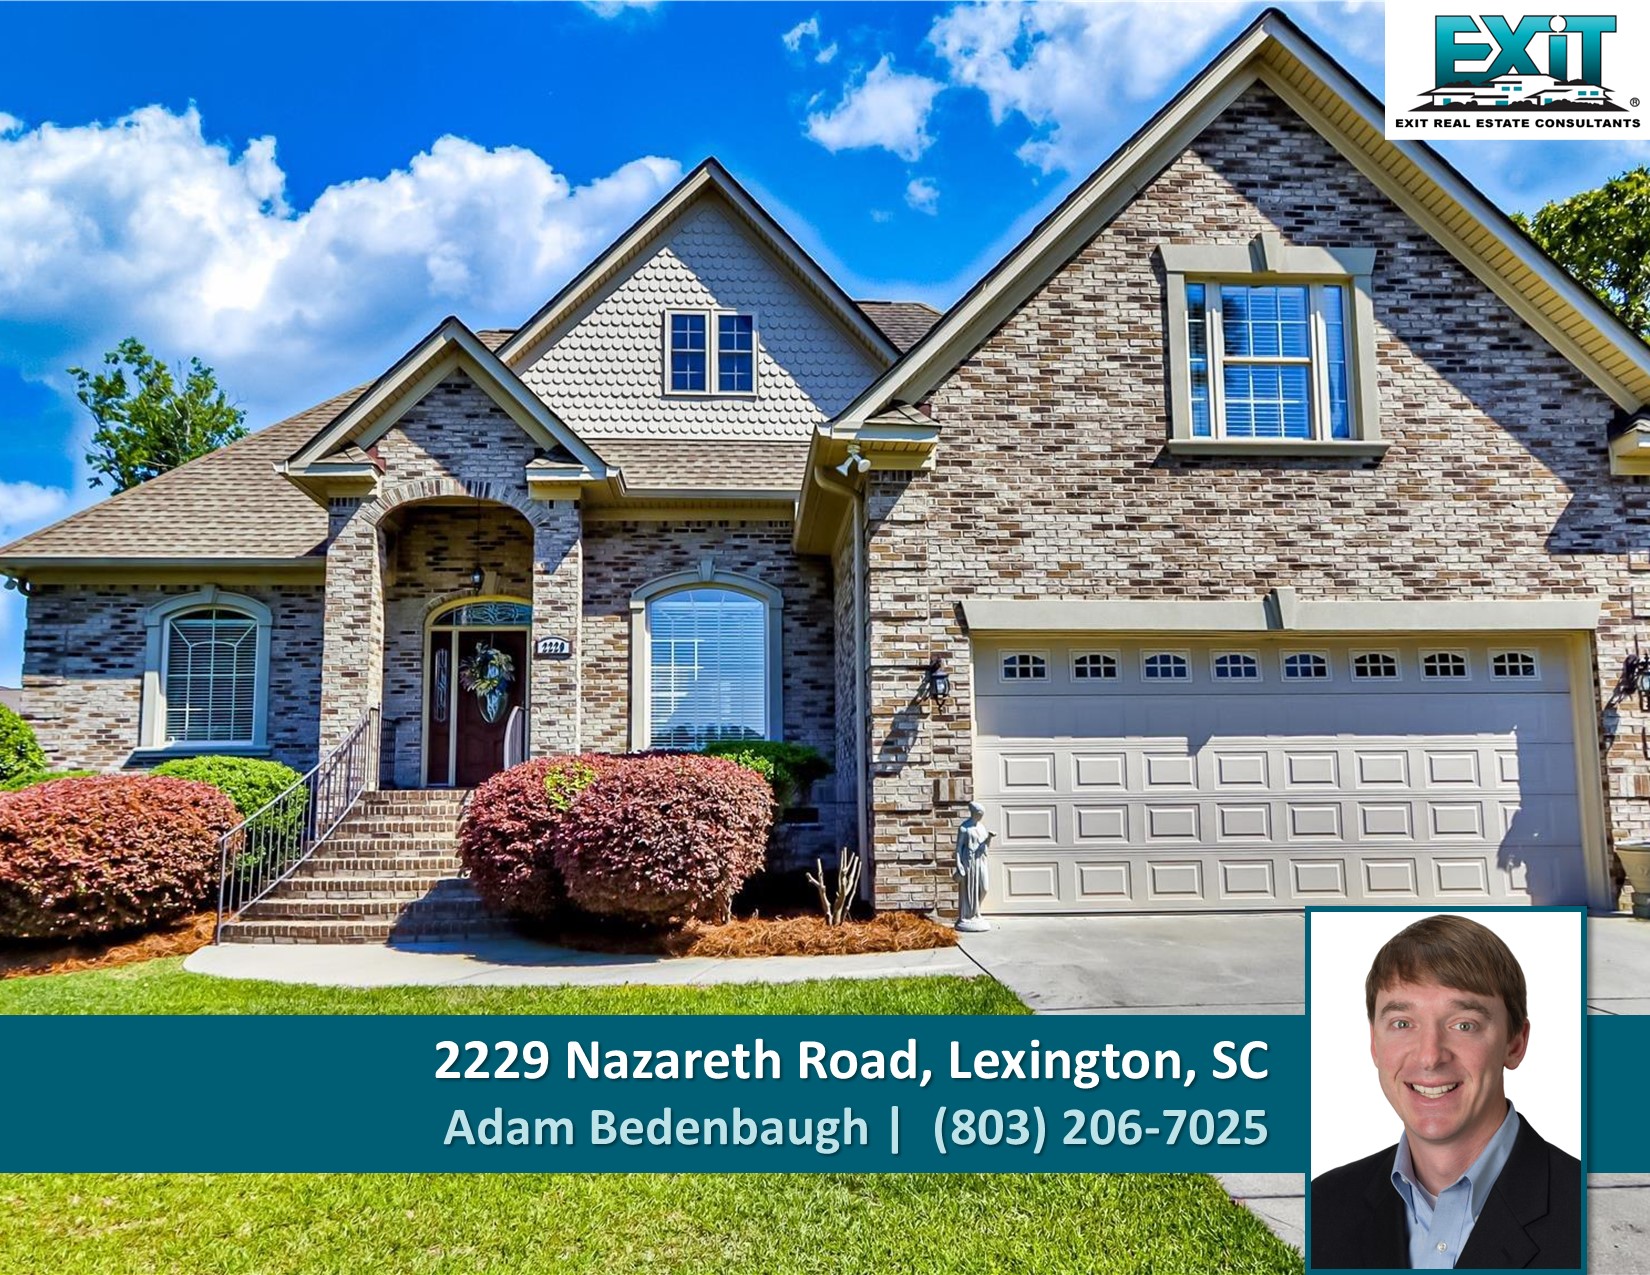 Just listed in Lexington